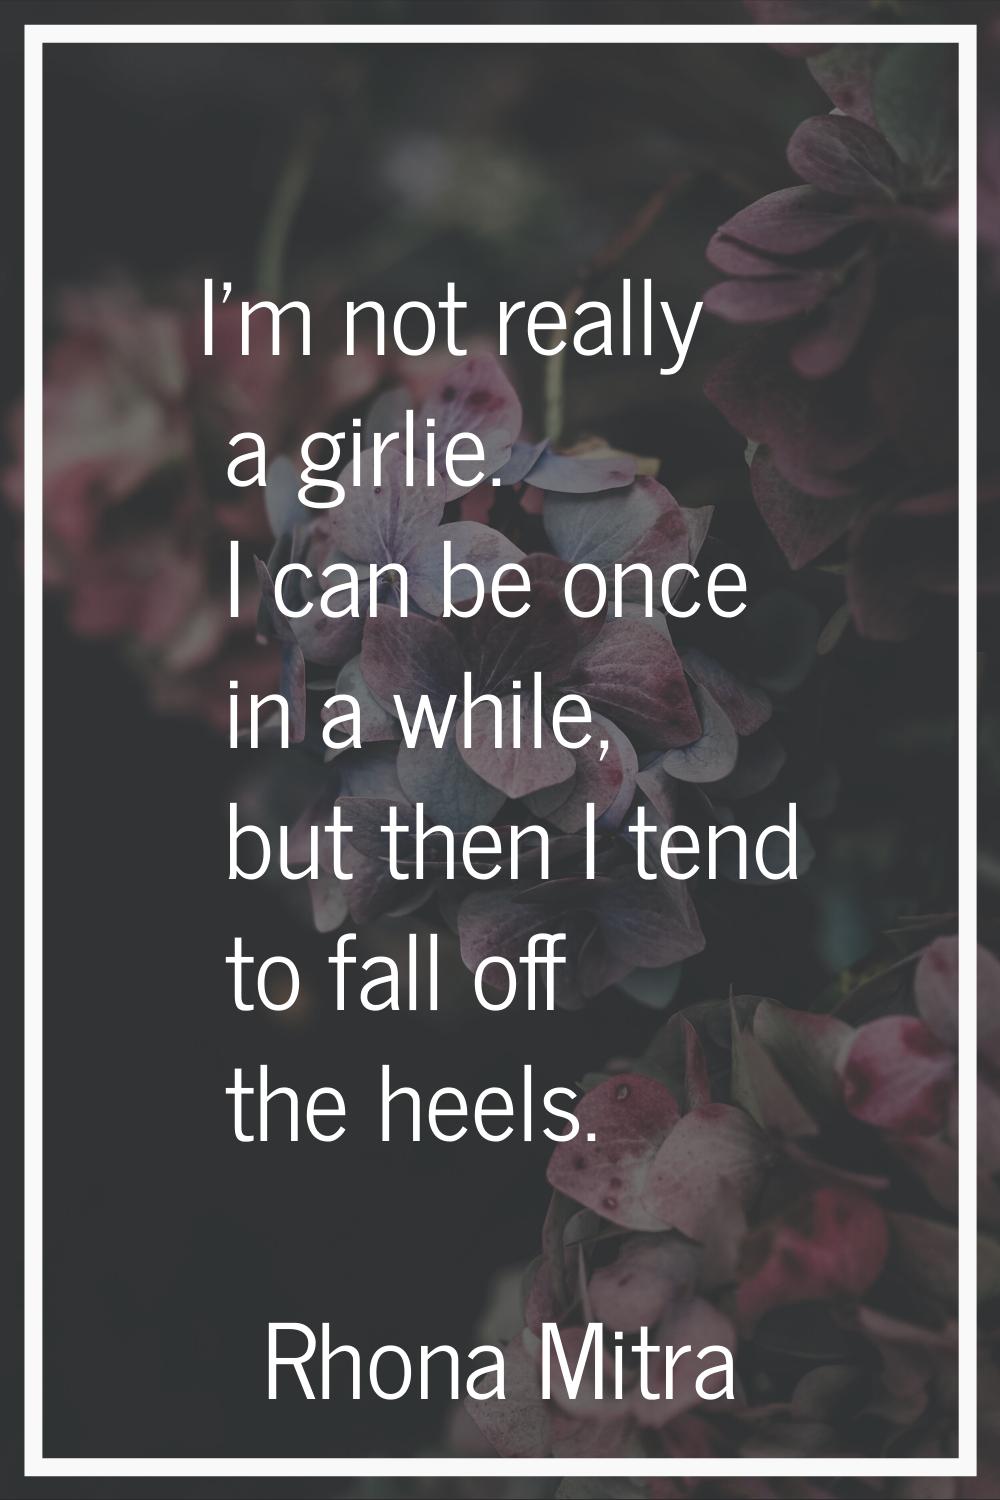 I'm not really a girlie. I can be once in a while, but then I tend to fall off the heels.